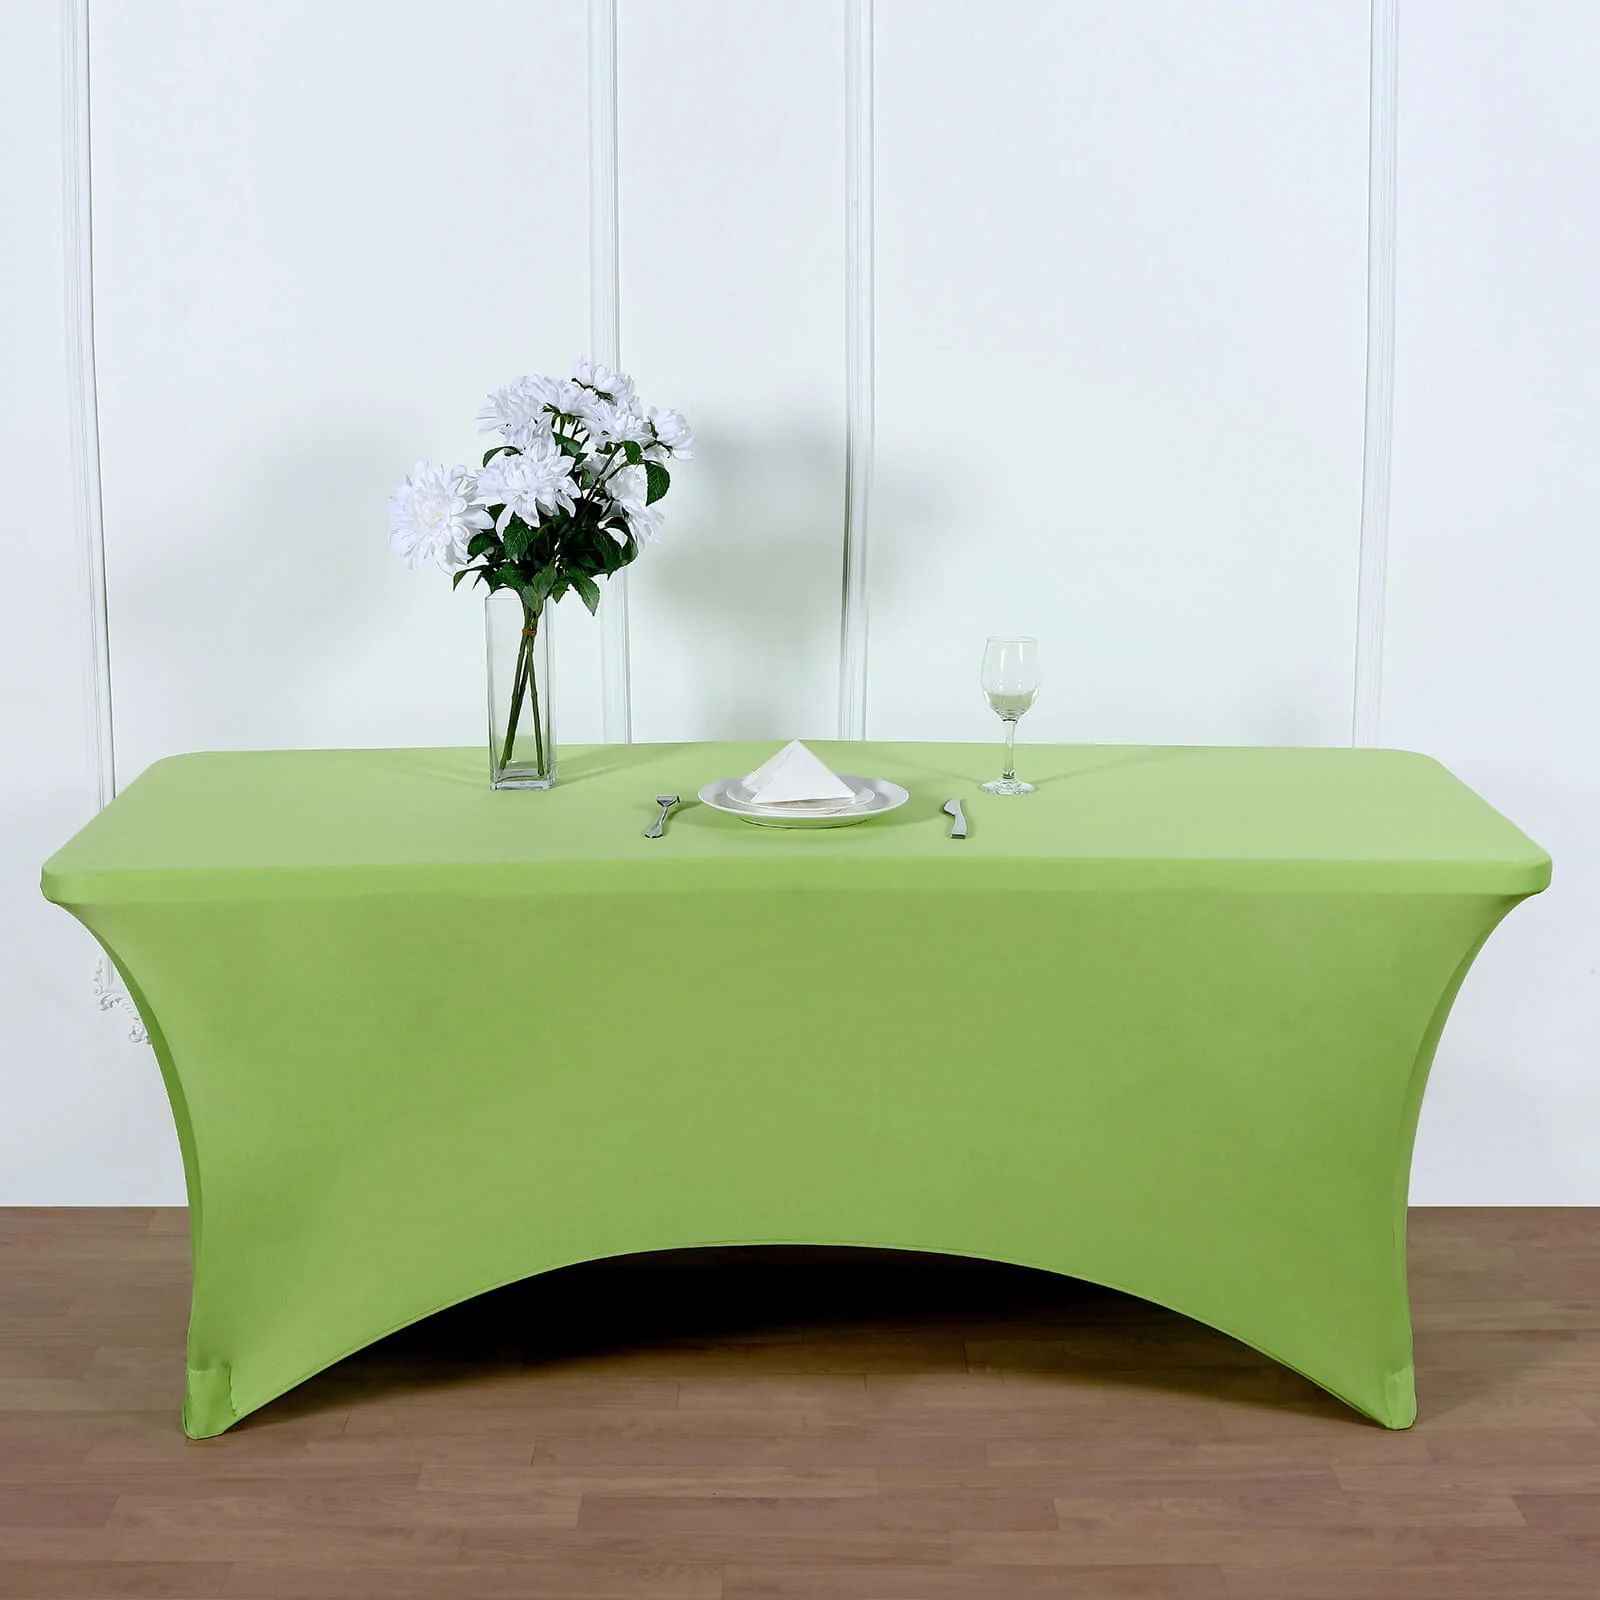 Apple Green - 6 Ft Rectangular Spandex Table Cover Wedding Party - £27.04 GBP